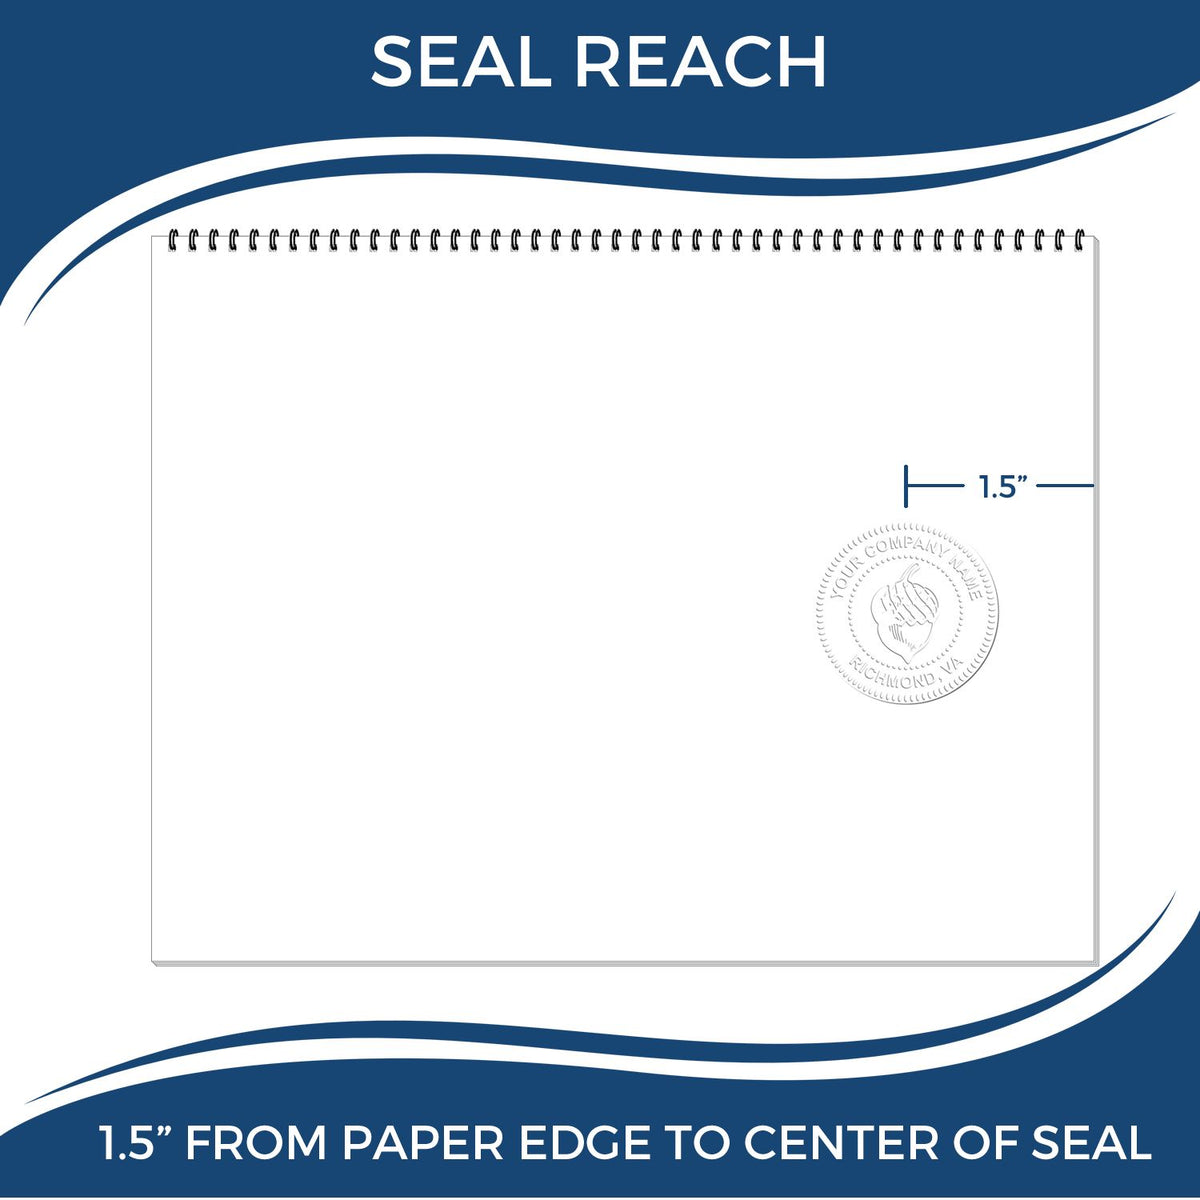 An infographic showing the seal reach which is represented by a ruler and a miniature seal image of the Soft New Jersey Professional Engineer Seal